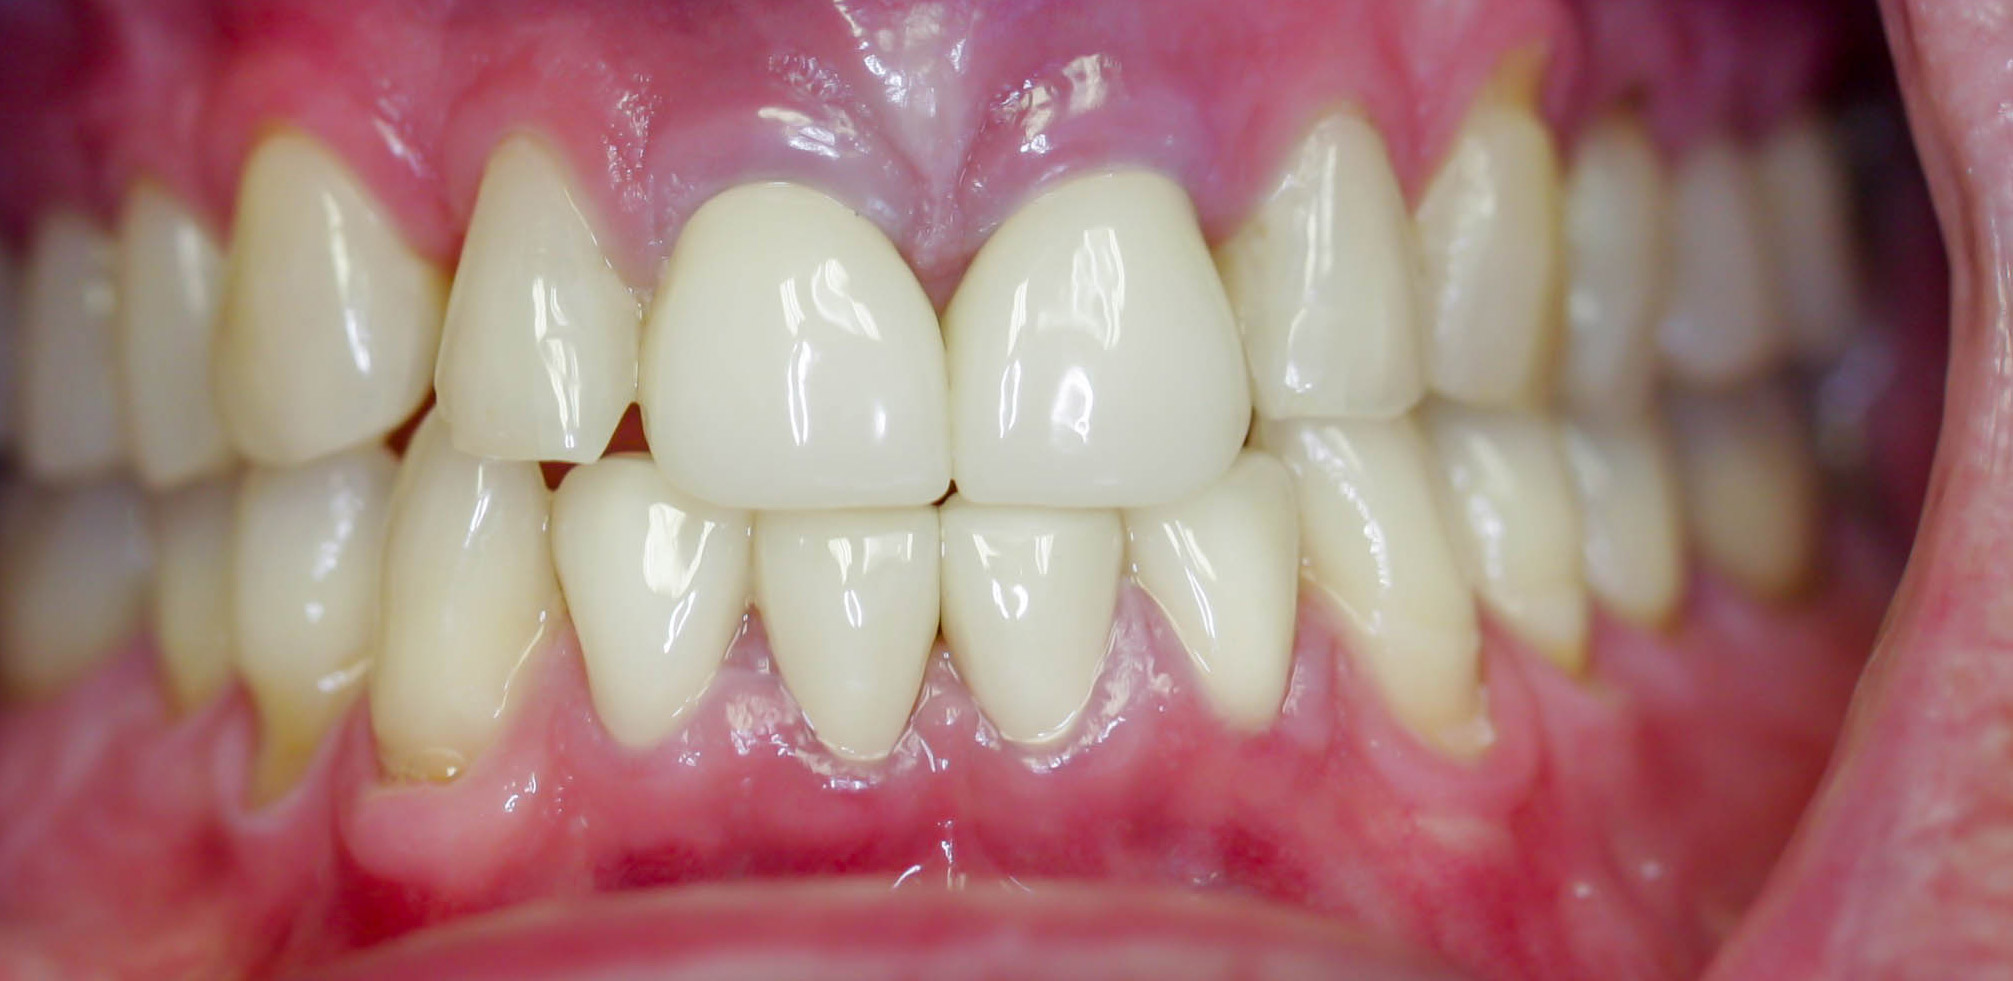 Smile makeover with crowns -- the After picture